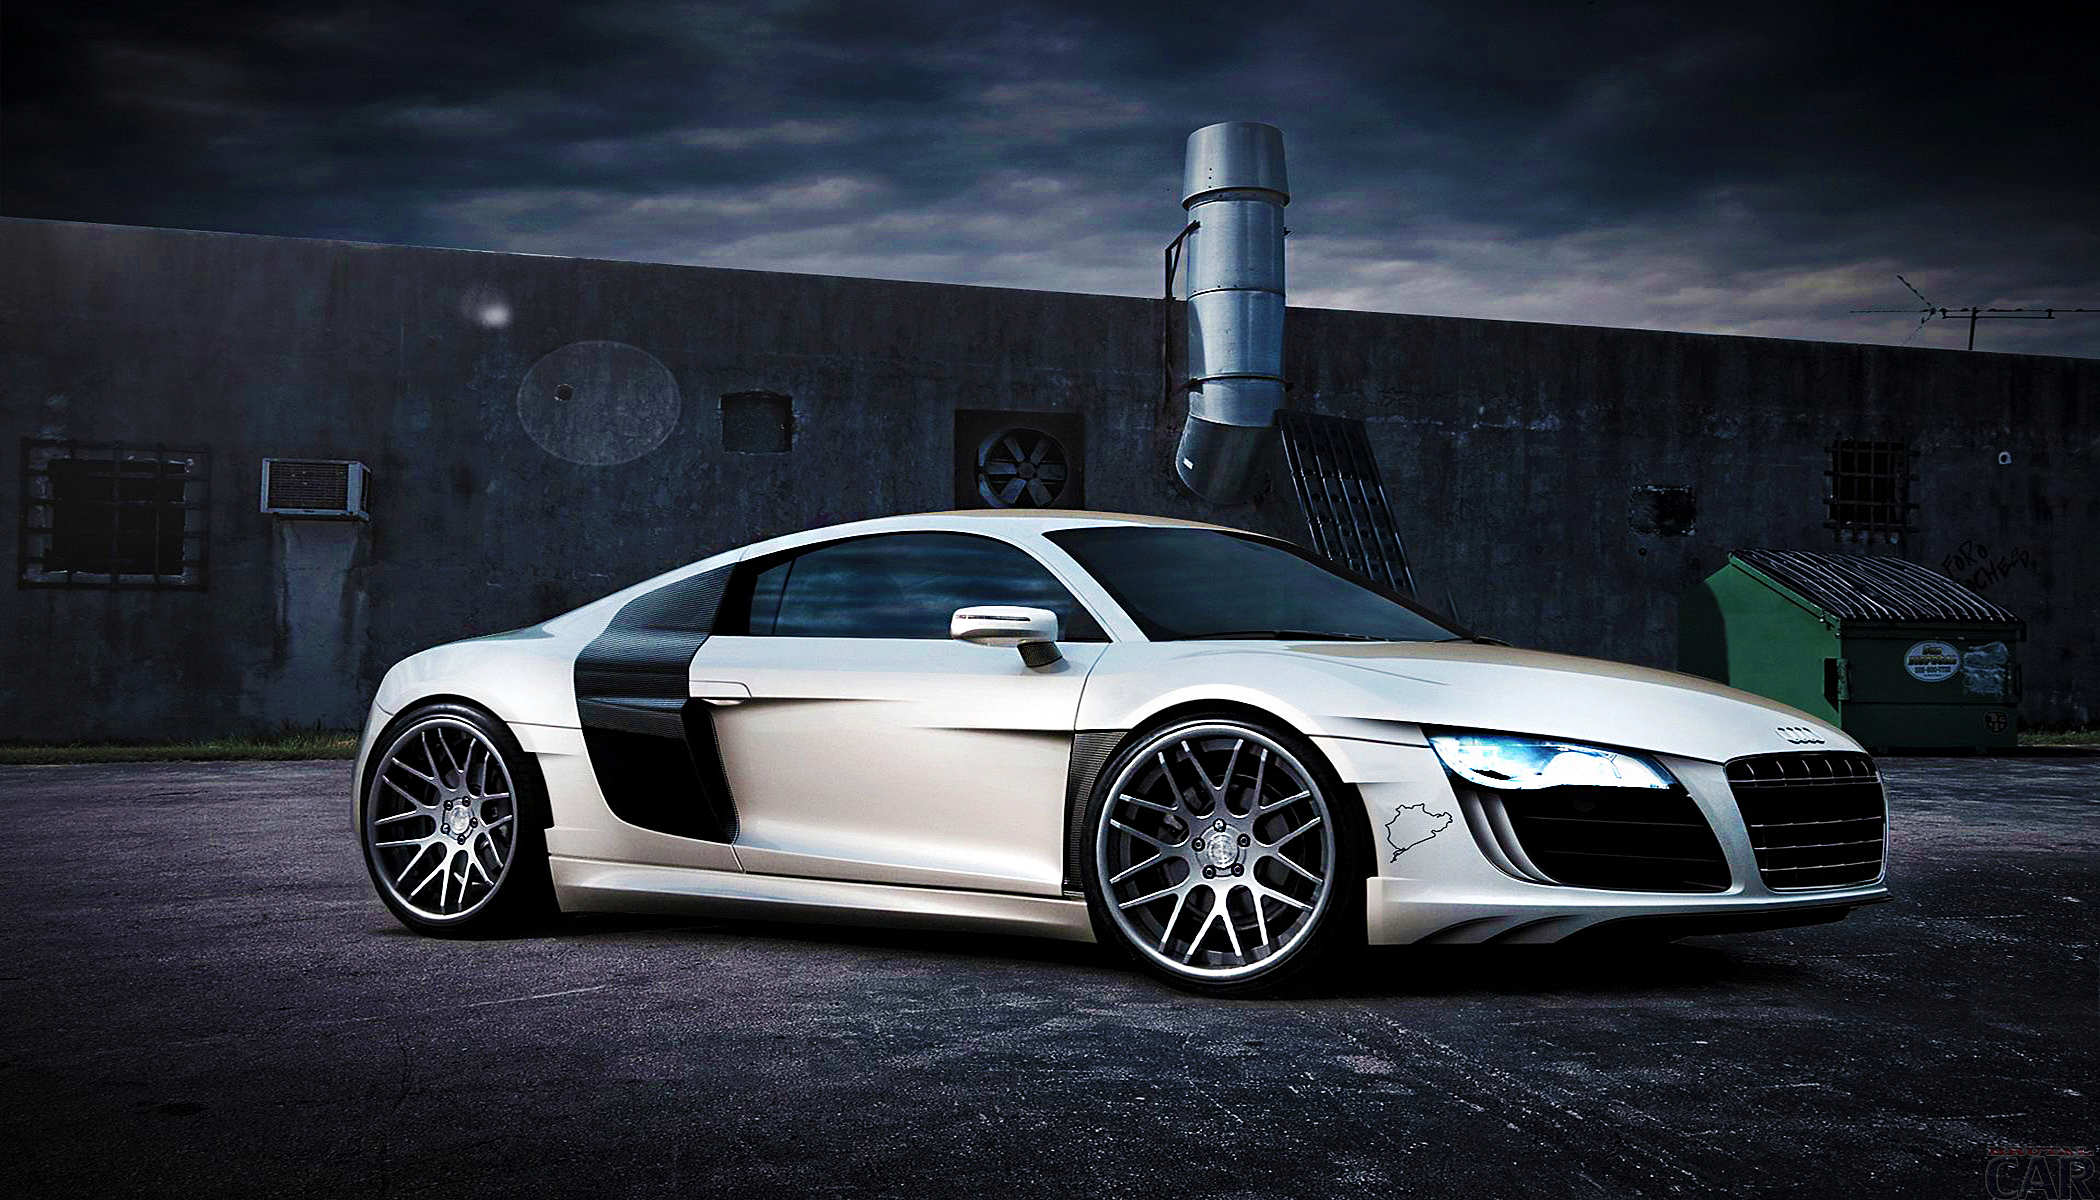 Audi R8 Wallpaper. Free backgrounds of